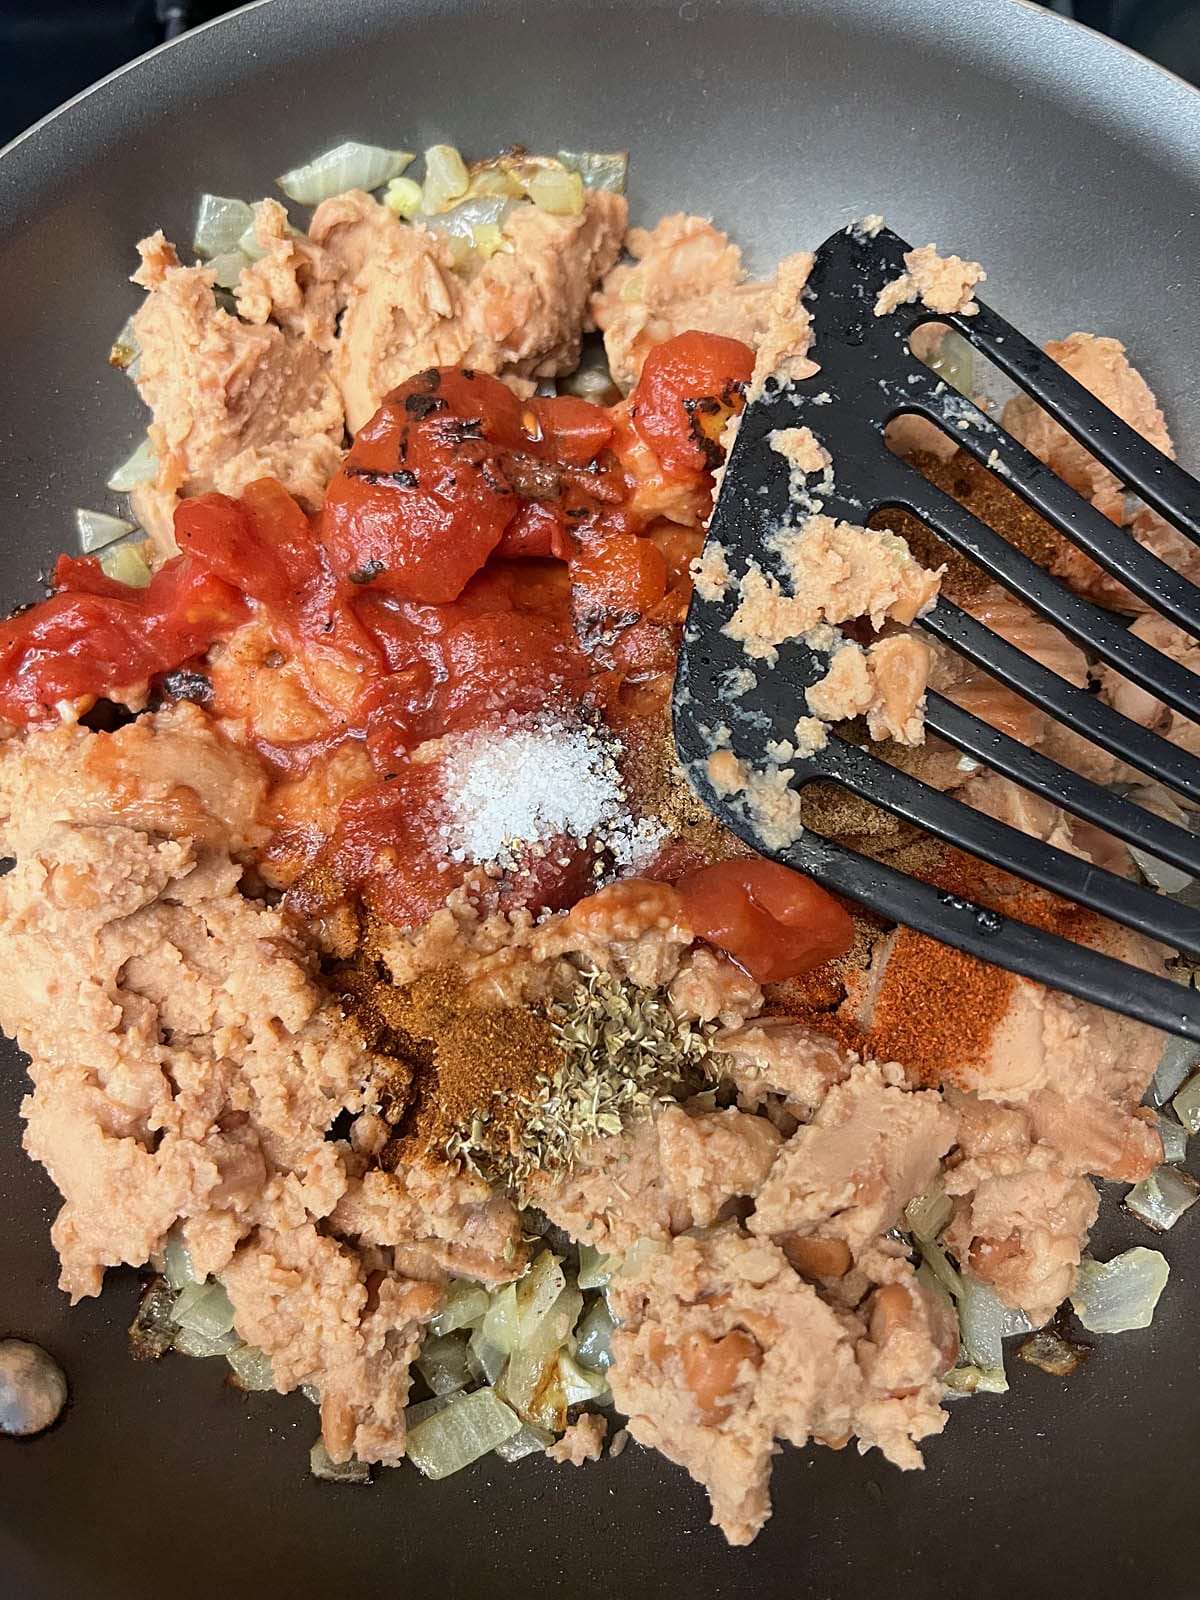 Refried beans, diced tomatoes, spices, and vegan cheddar added to the skillet.